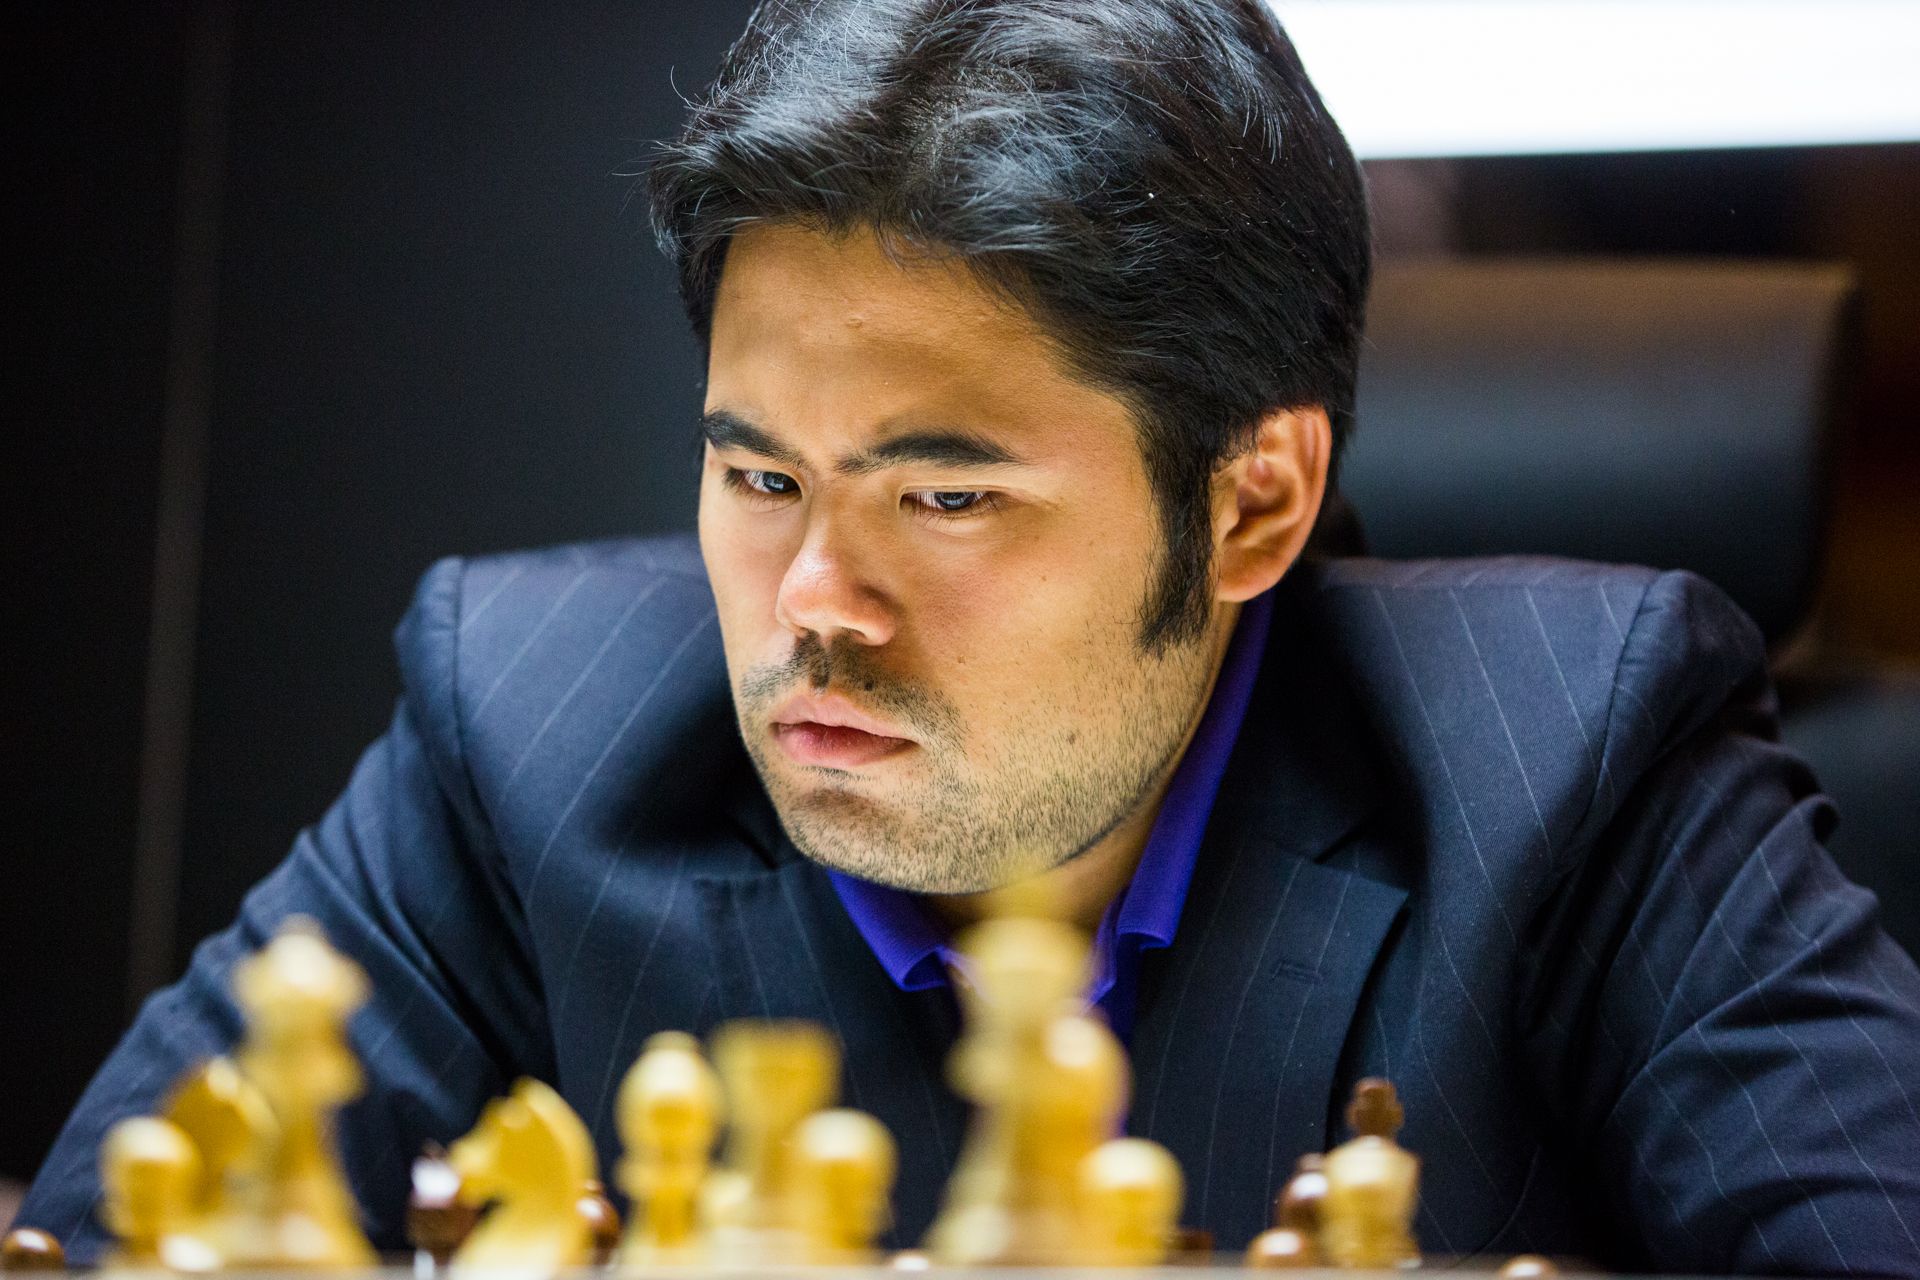 The Conversation: 5 Things To Know About American Chess Star